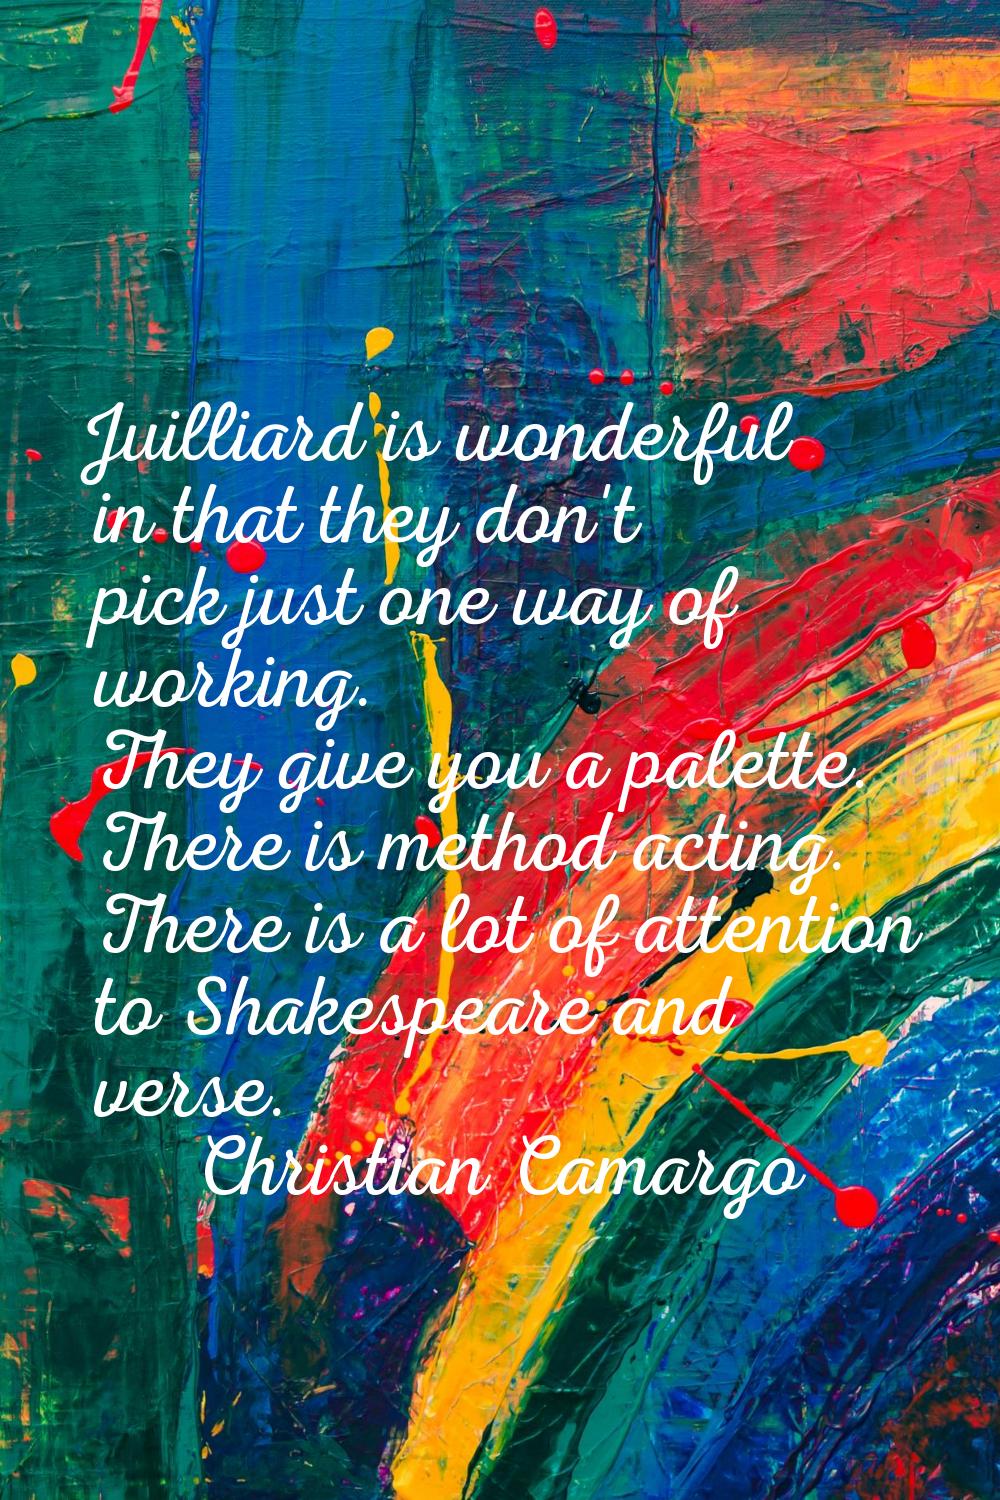 Juilliard is wonderful in that they don't pick just one way of working. They give you a palette. Th